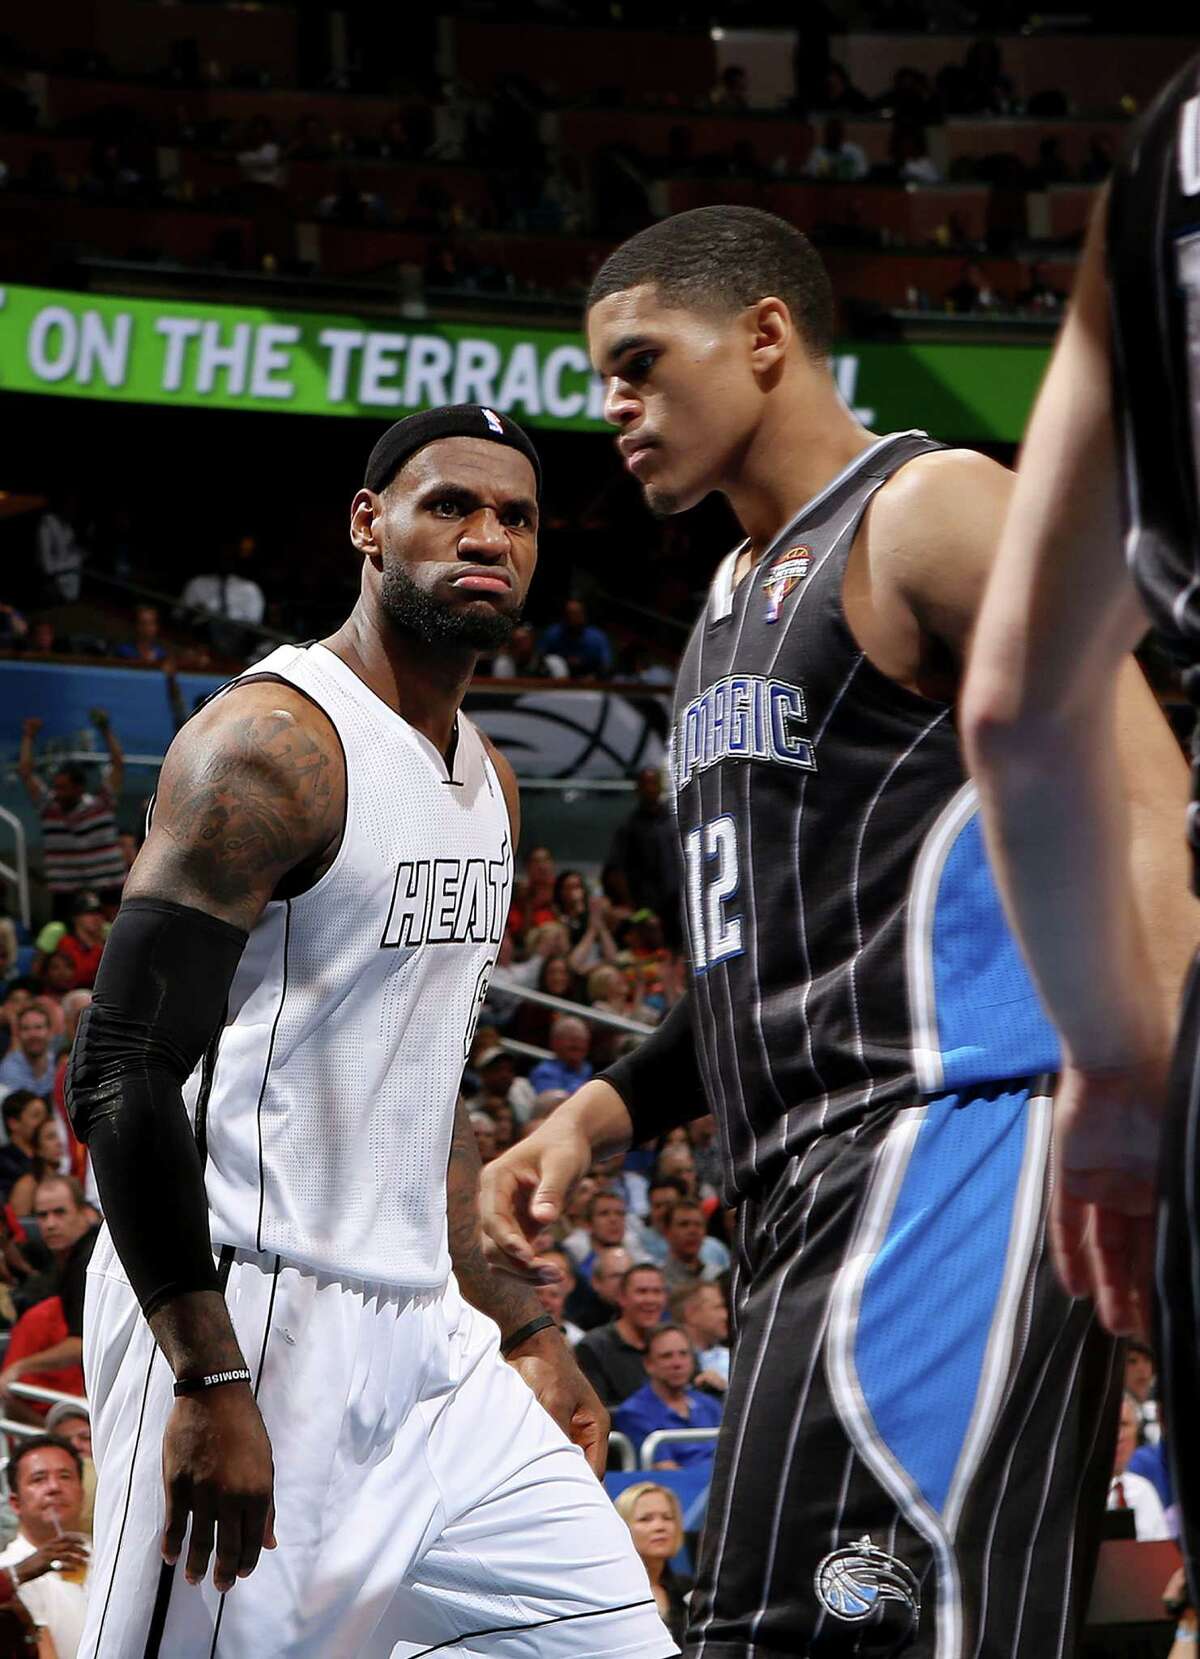 LeBron James stares down the Magic's Tobias Harris after a dunk.